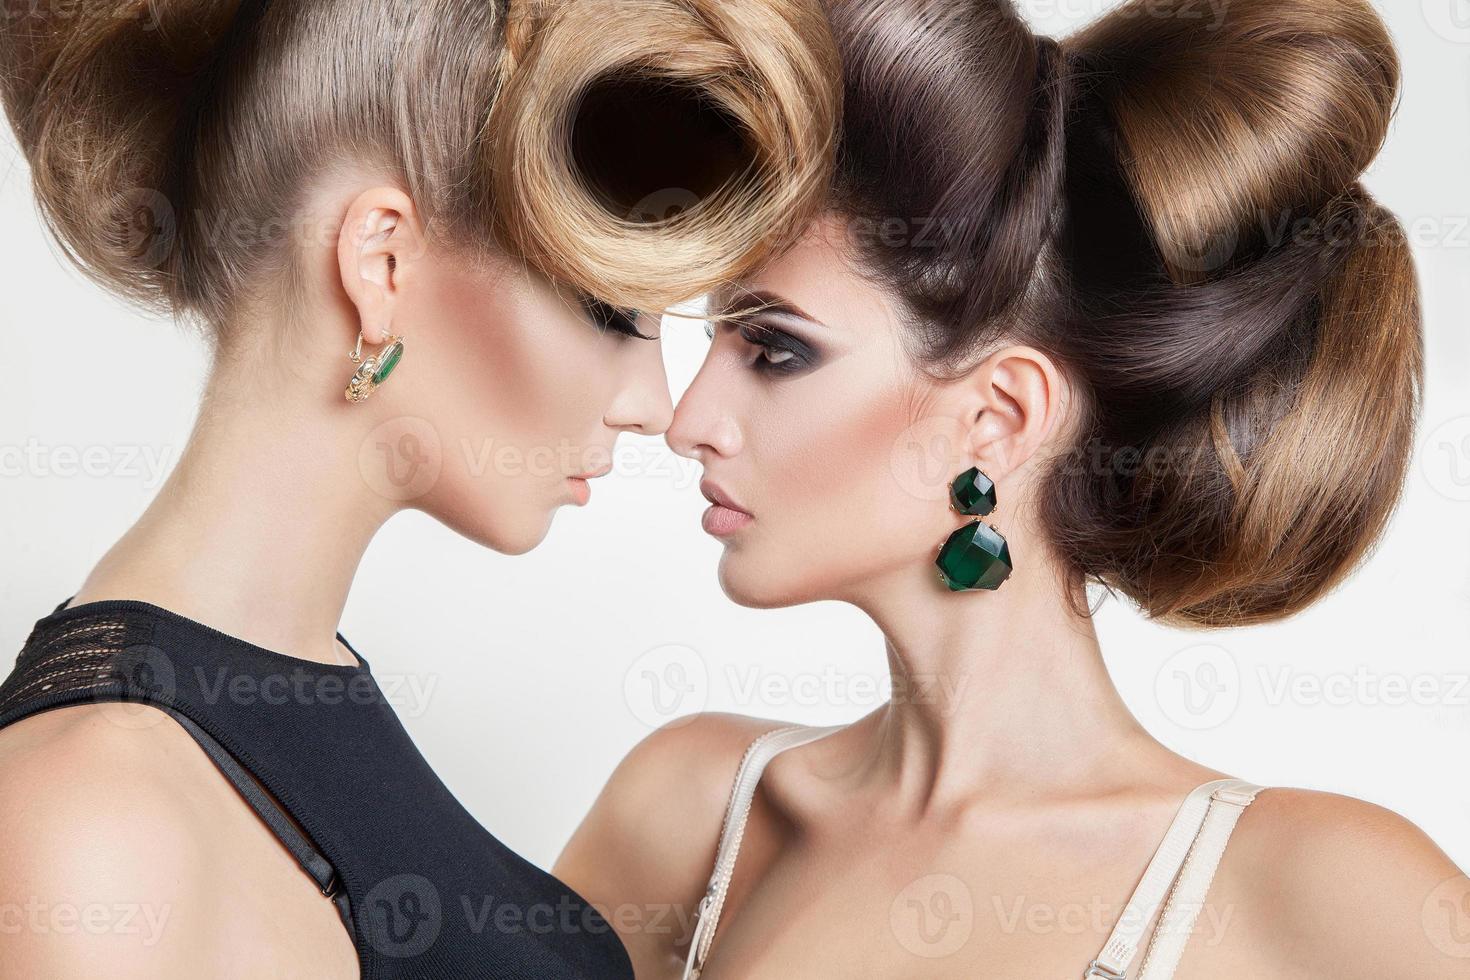 Portrait of two sexy women in studio with volume creative hairstyle looking at each others photo